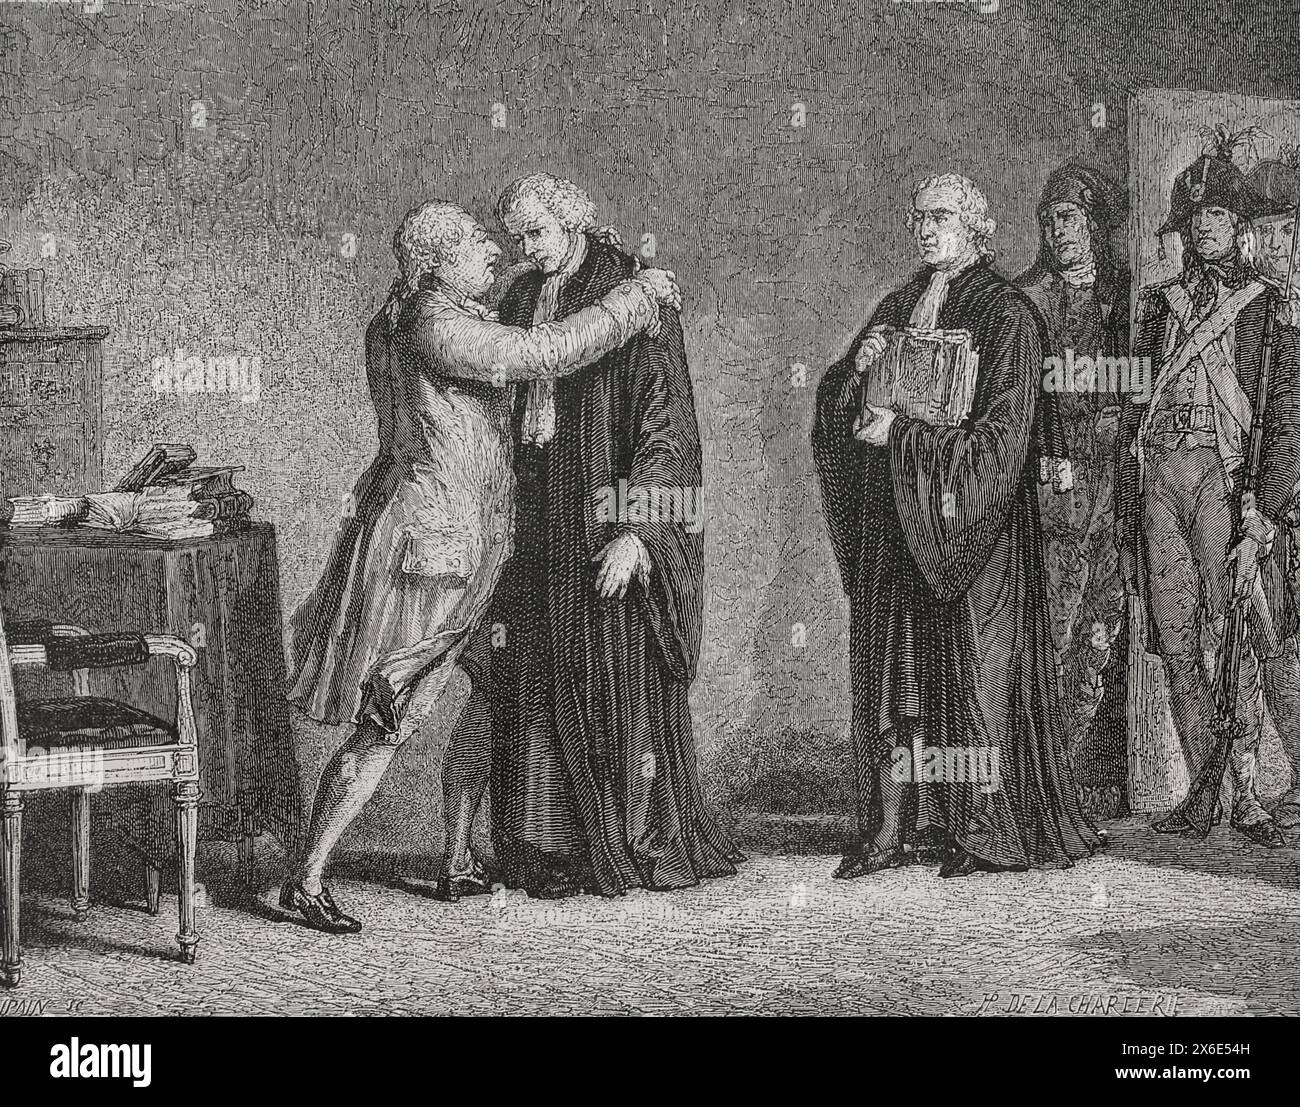 French Revolution. Judgment of King Louis XVI of France (1754-1793). Meeting of Louis XVI with his lawyer Malesherbes (1721-1794). Drawing by Hippolyte de la Charlerie. Engraving. 'History of the French Revolution'. Volume I, 1876. Stock Photo